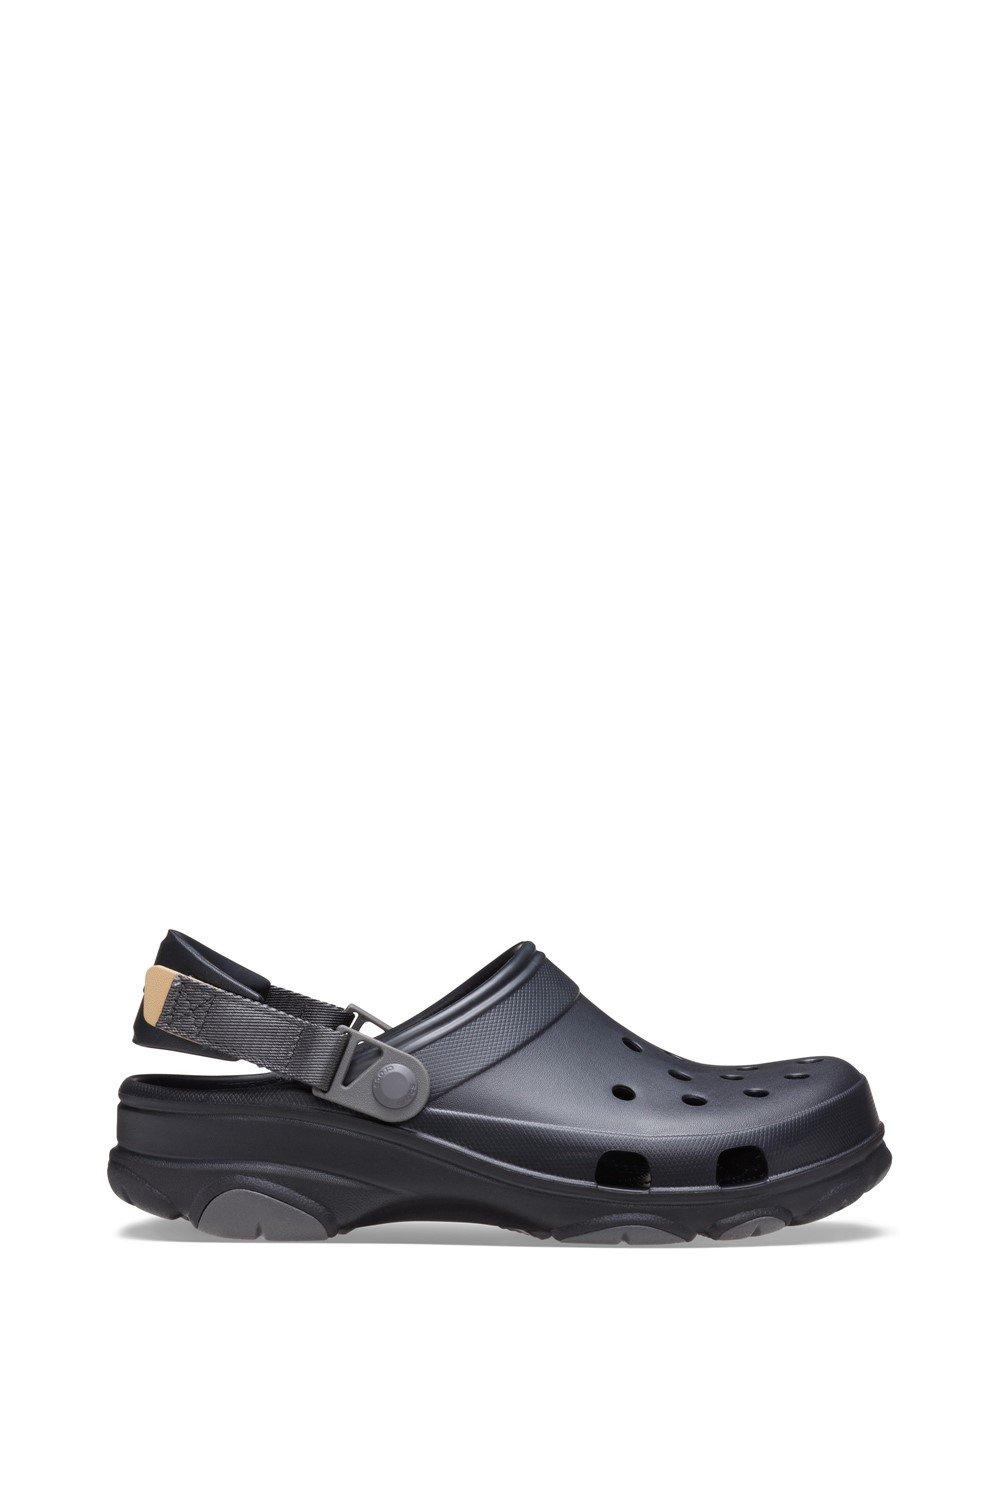 'Classic All-Terrain' Slip-on Shoes